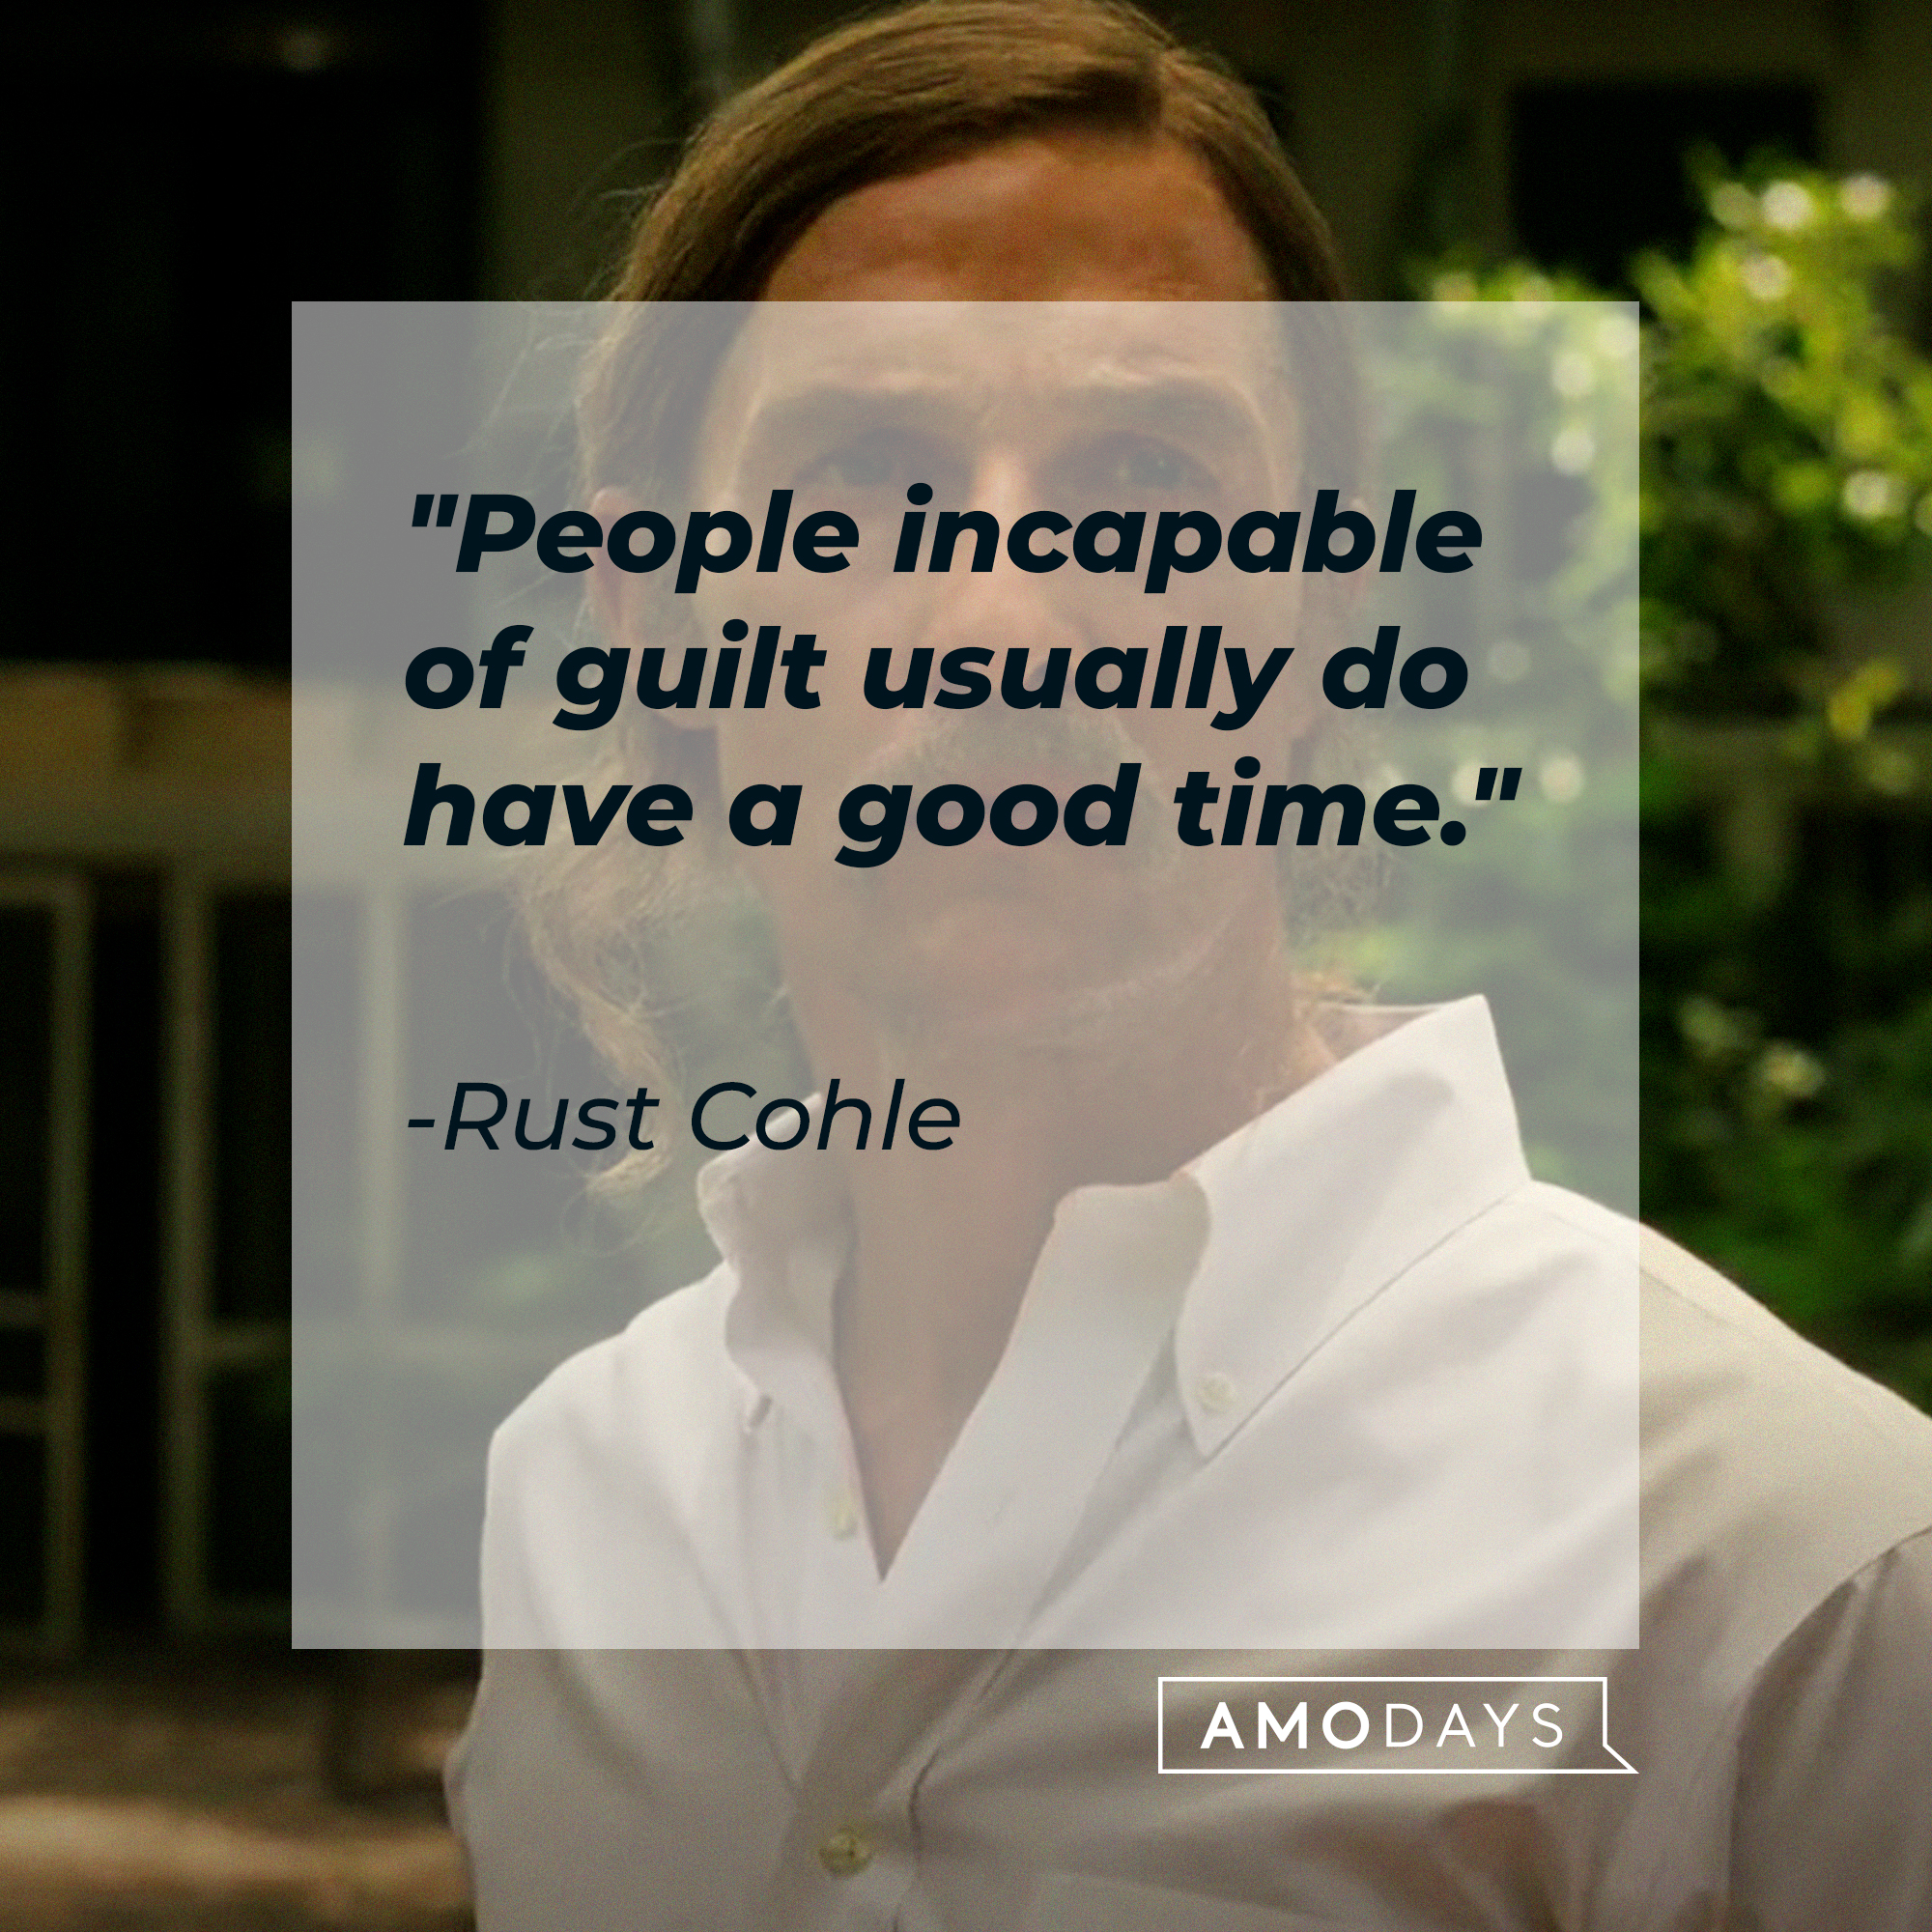 Rust Cohle's quote: "People incapable of guilt usually do have a good time." | Source: facebook.com/TrueDetective